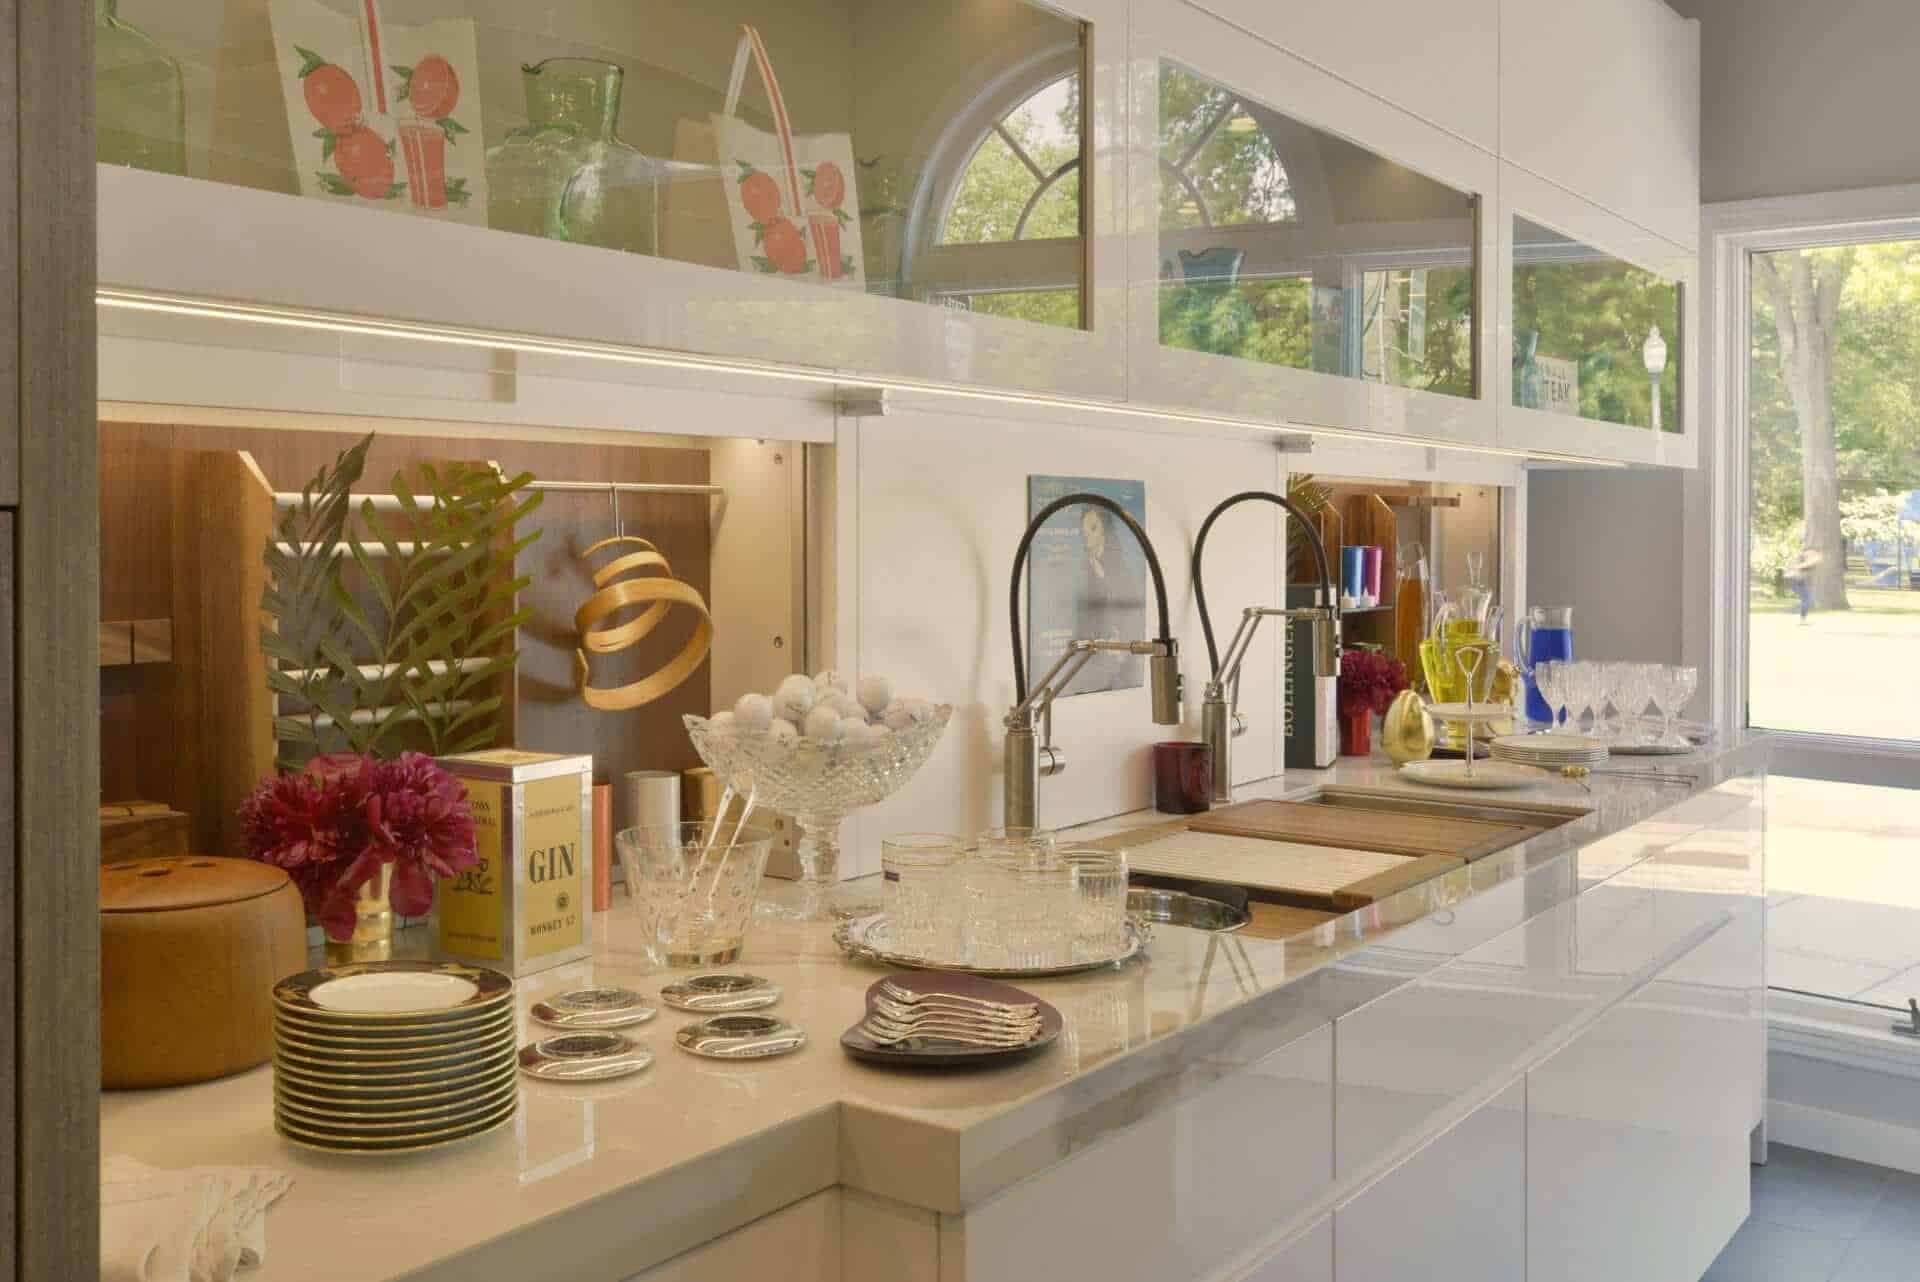 Sun drenched kitchen with cocktail accents